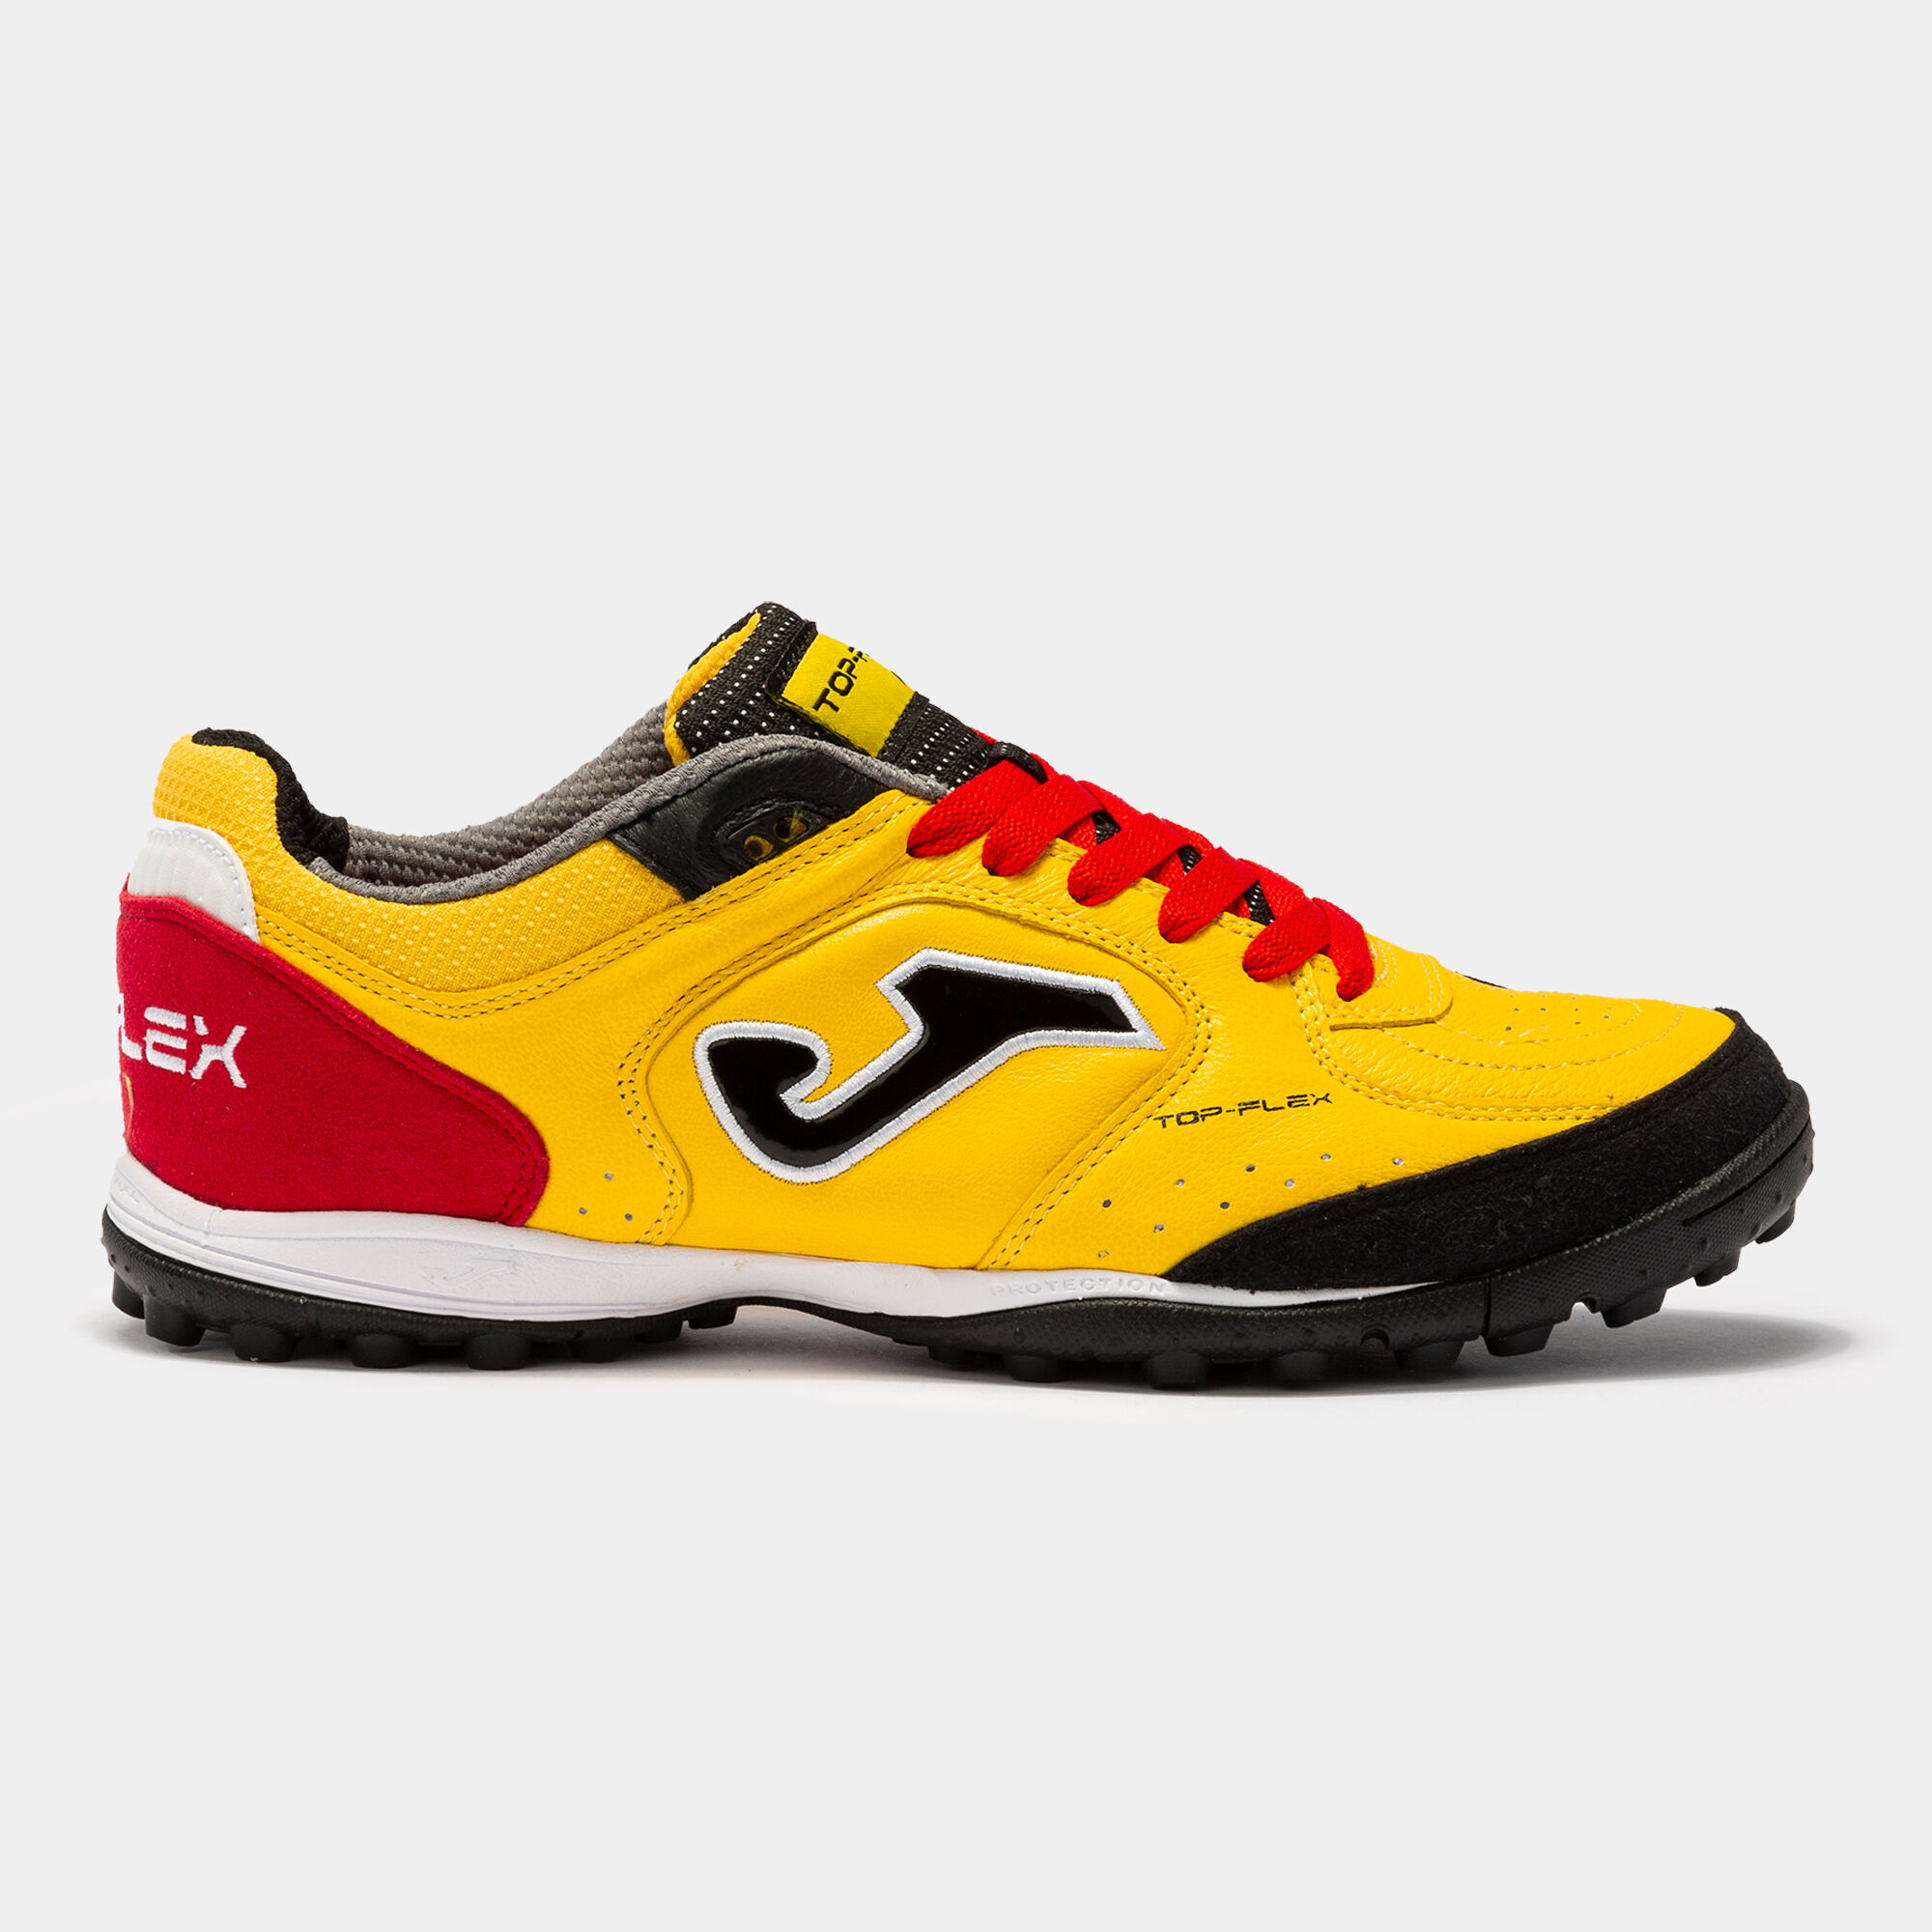 FOOTBALL BOOTS TOP FLEX 22 TURF YELLOW CORAL